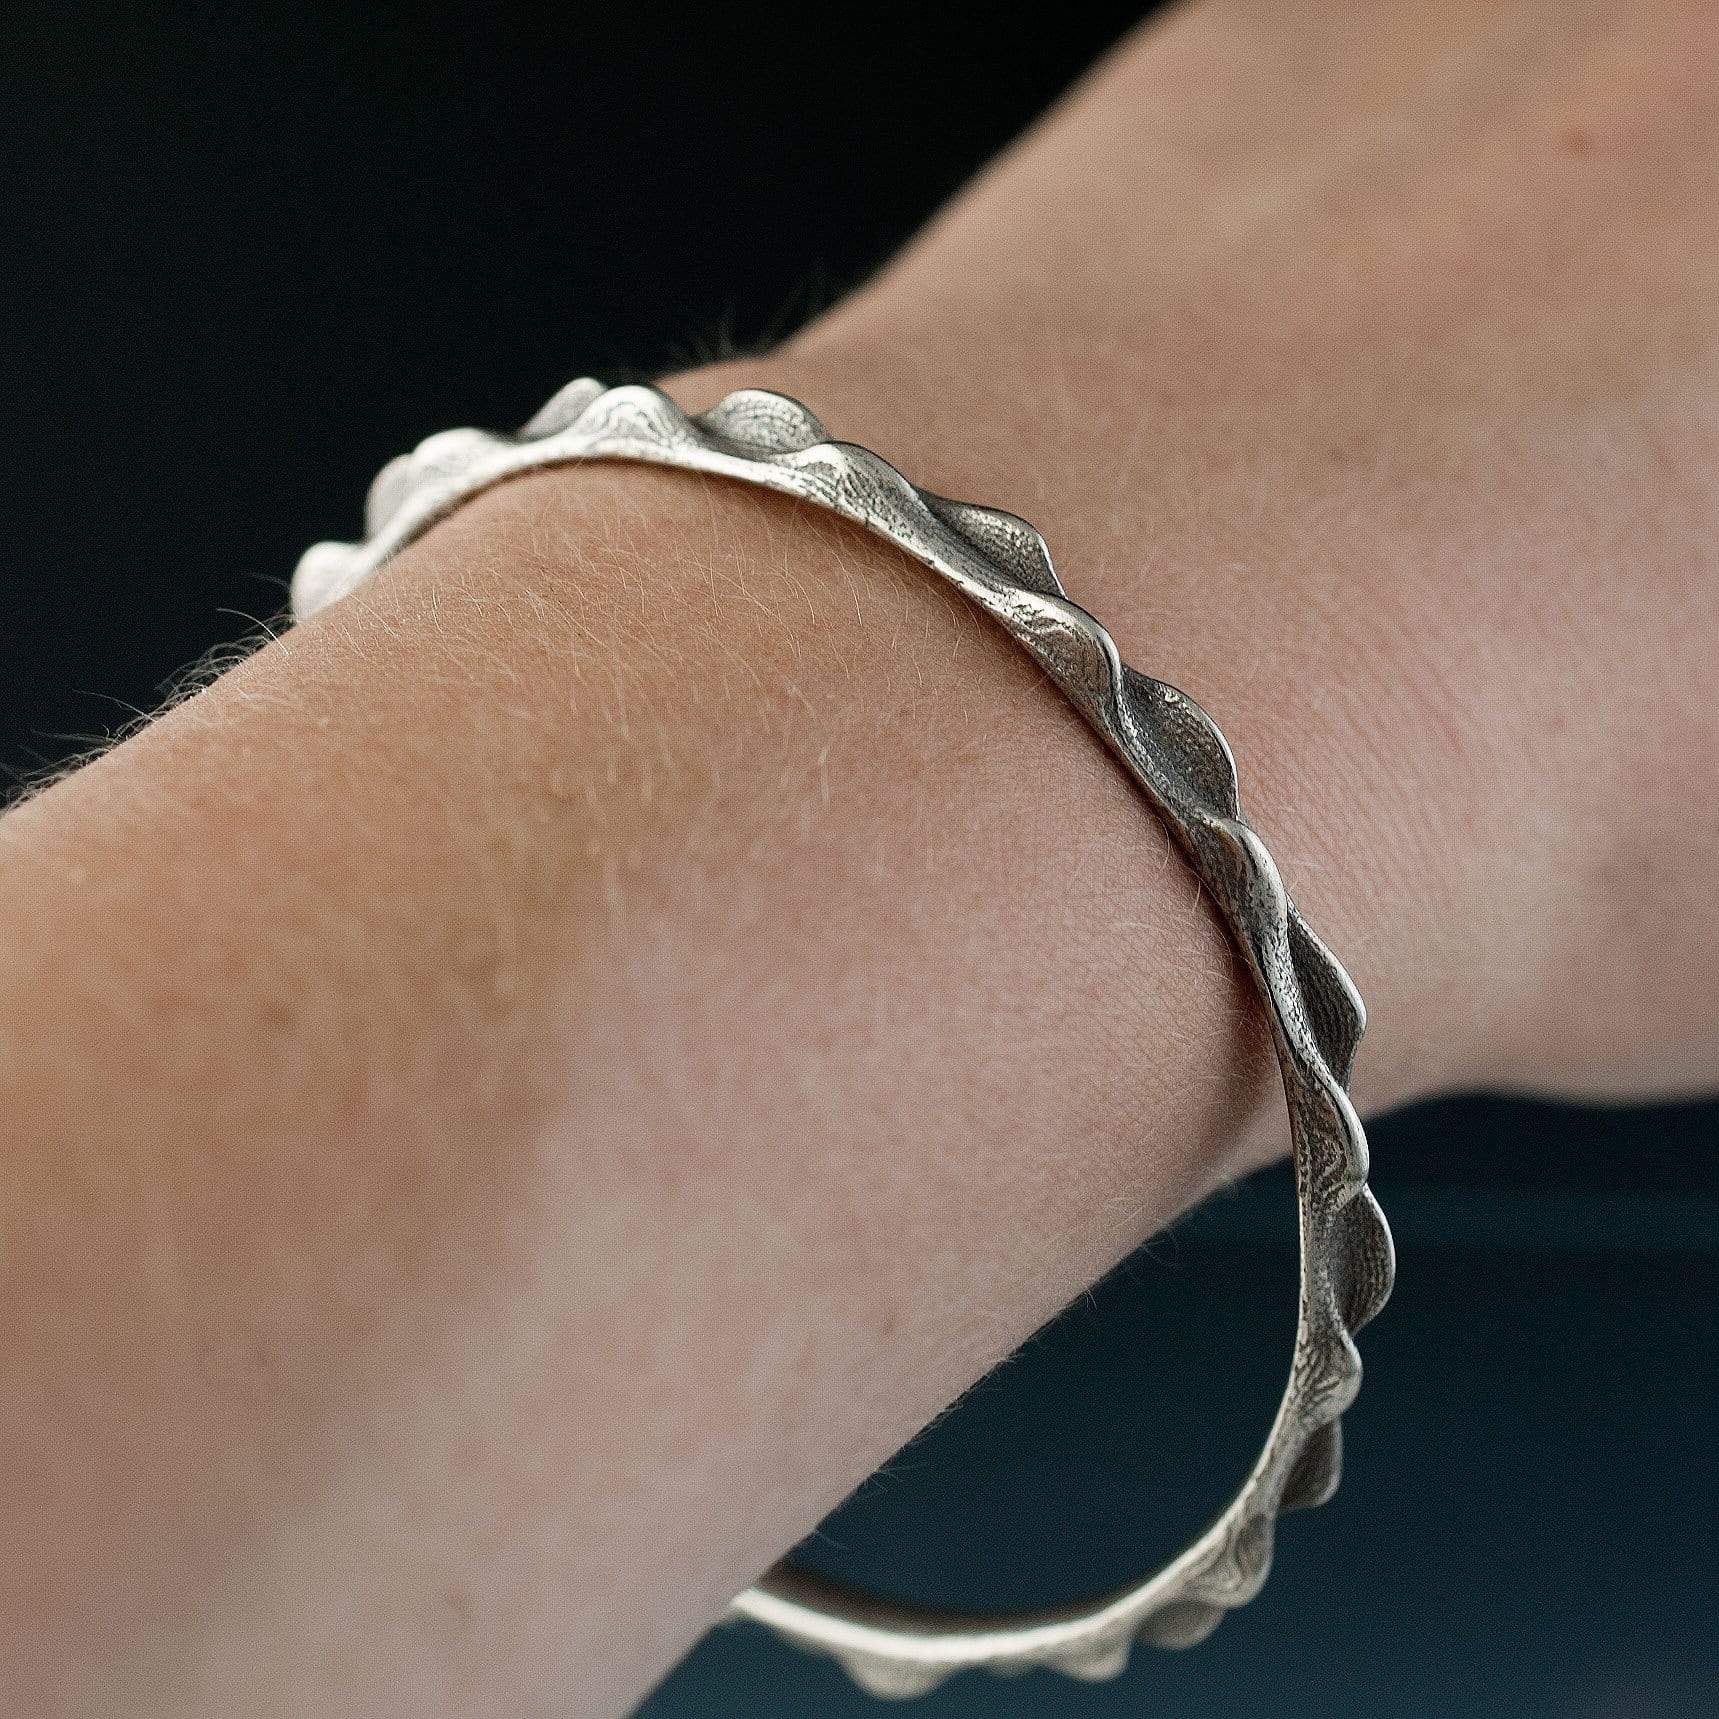 Bumpy Stainless Steel Bracelet Bangle 3D Printed Design, Ready to Ship